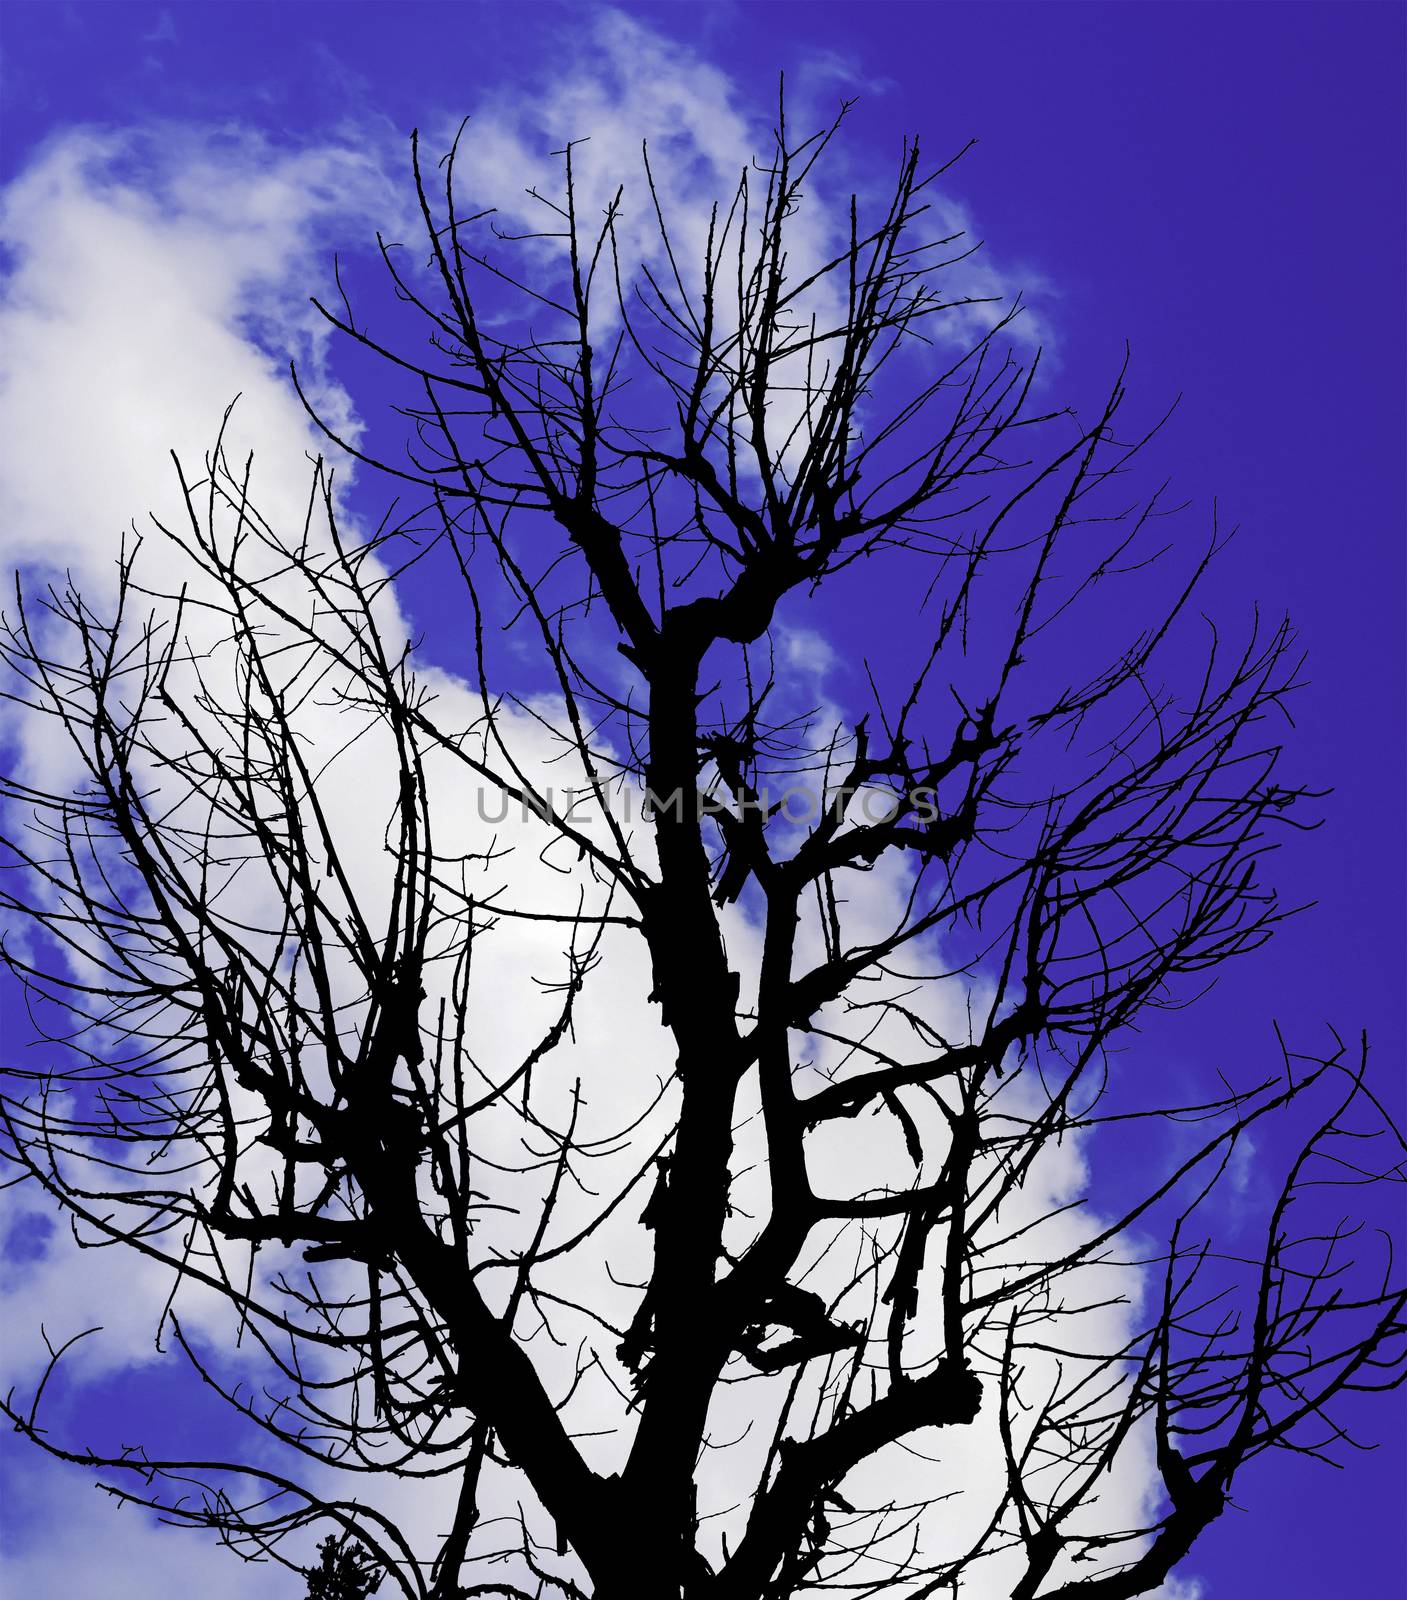 Silhouette Dead Tree and Cloudy Blue Sky Background by kobfujar